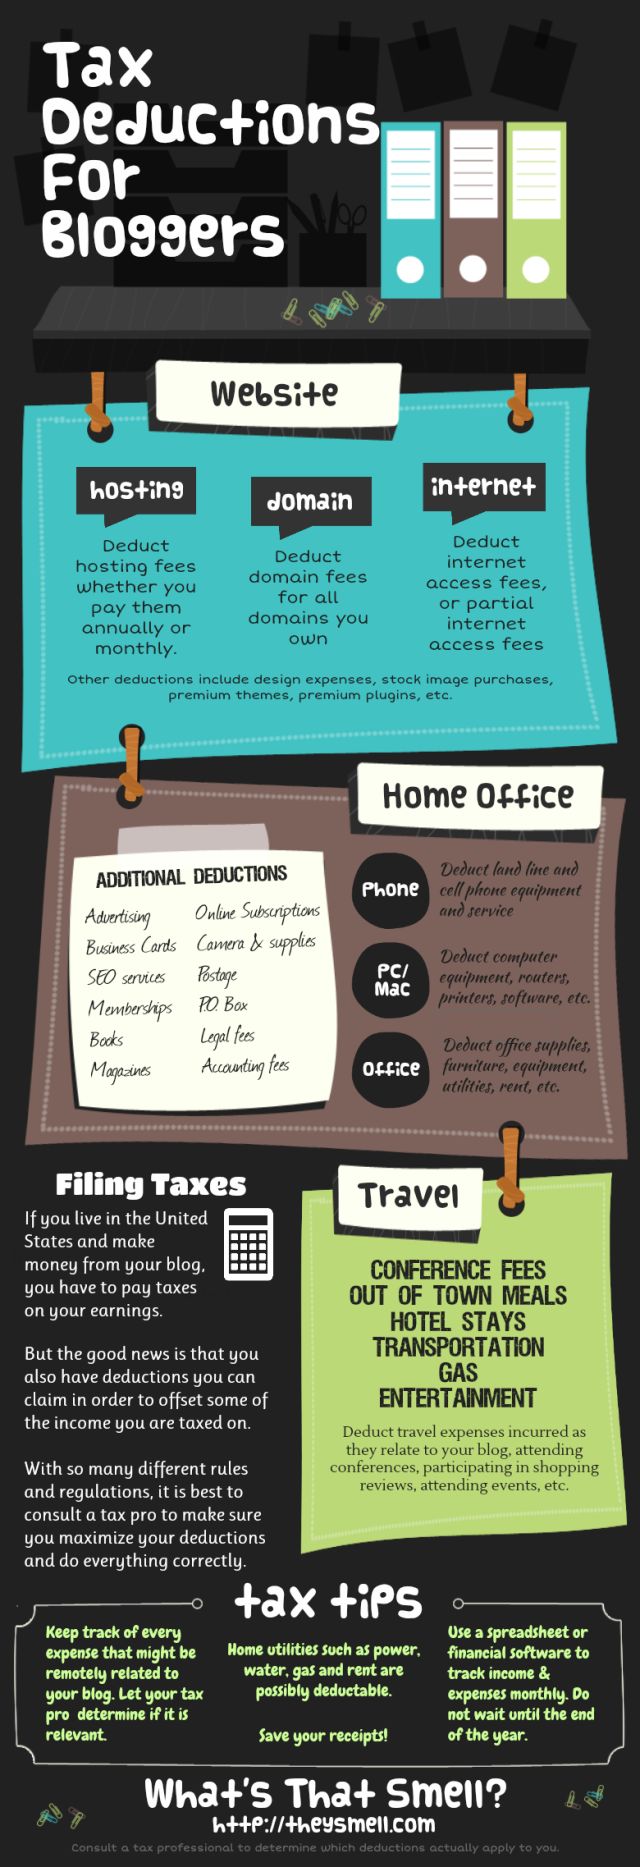 tax-deductions-for-bloggers